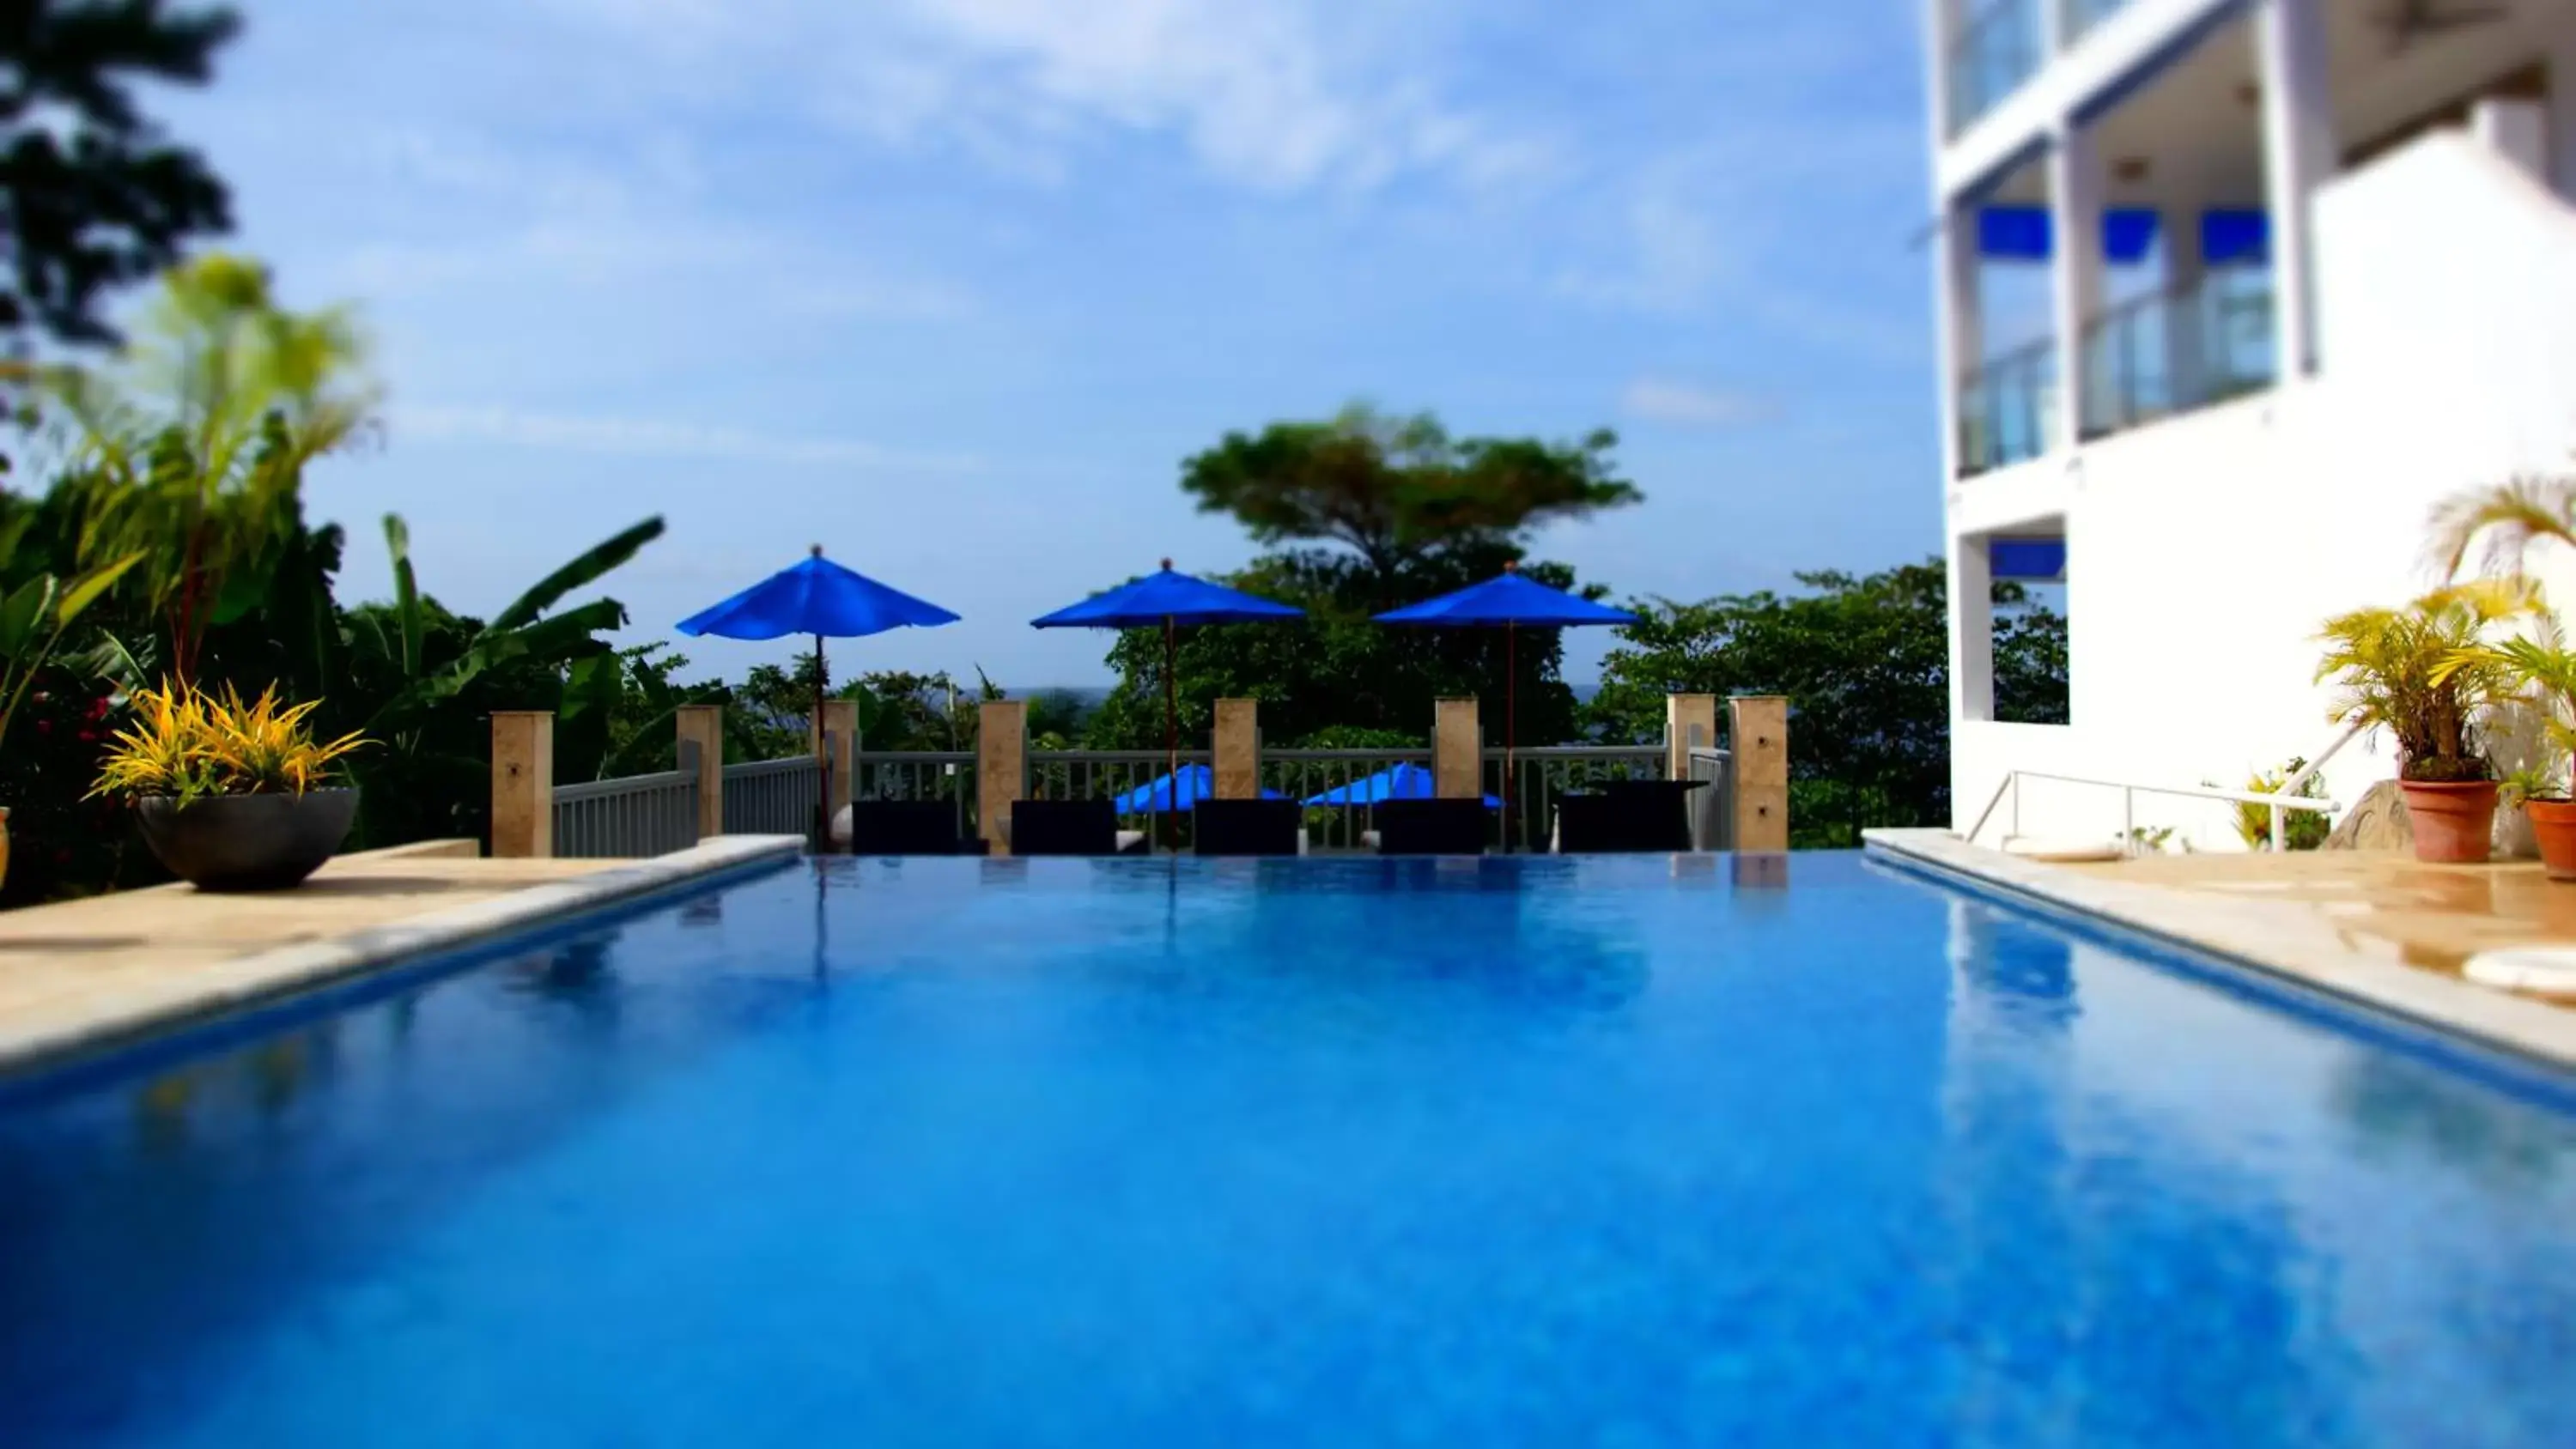 Property building, Swimming Pool in Bacolet Beach Club